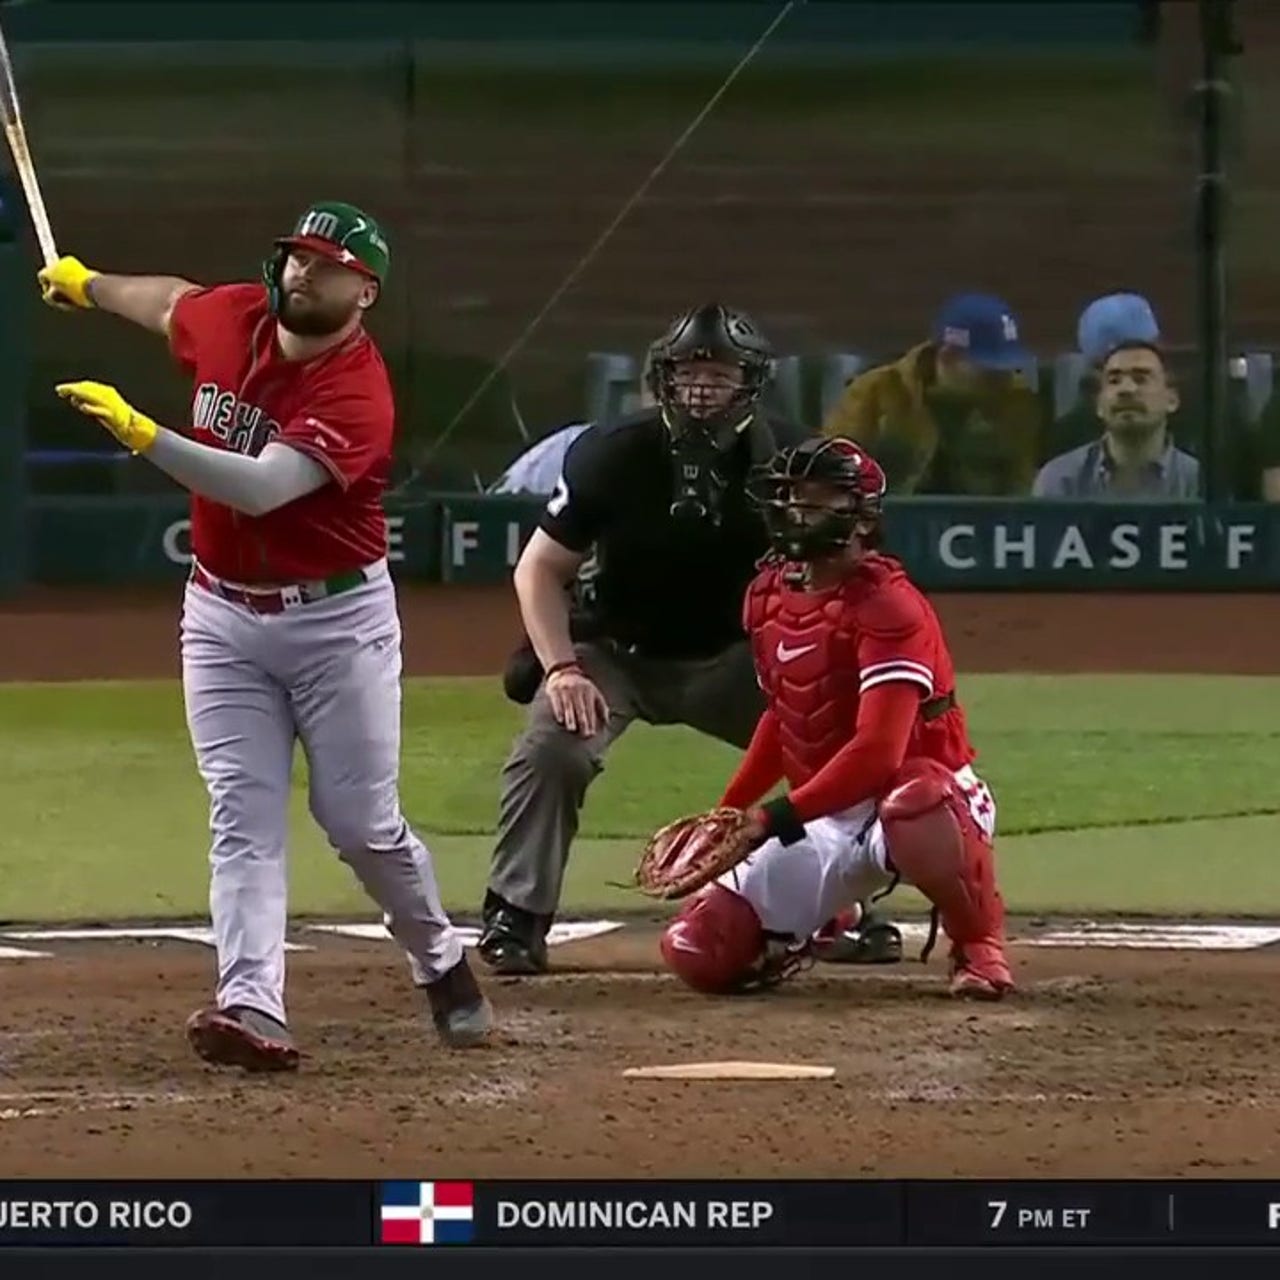 Rowdy Tellez LAUNCHES a home run to add to Mexico's lead over Canada, 10-3